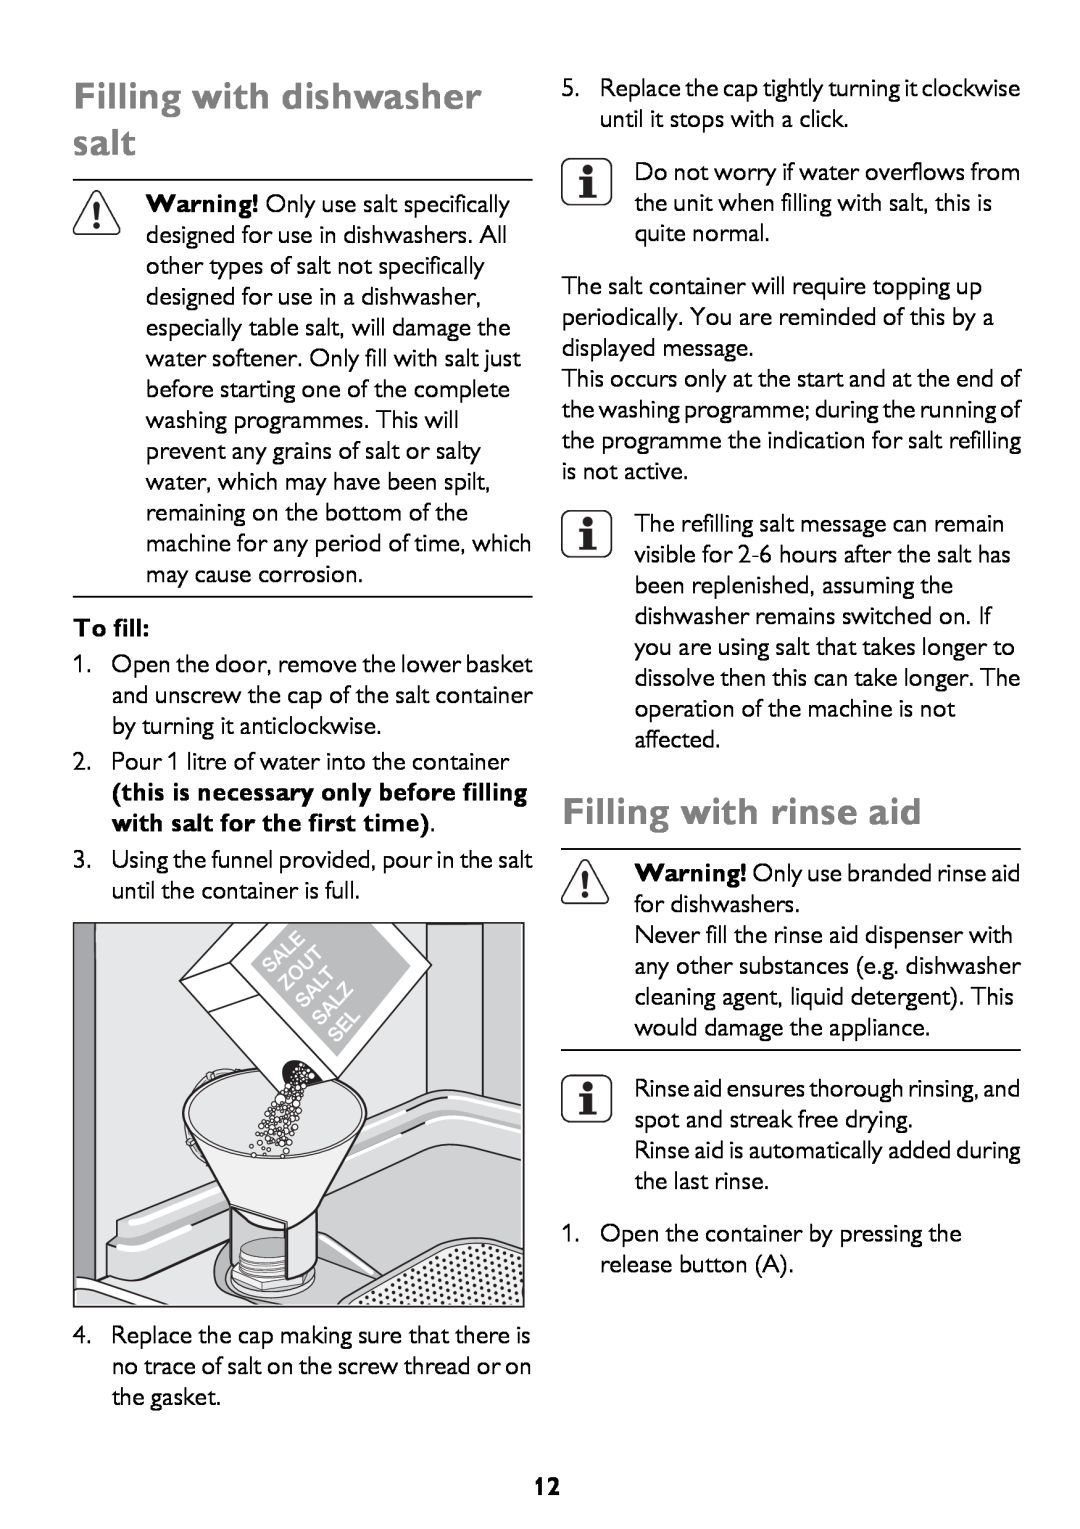 John Lewis JLDWW 1206 instruction manual Filling with dishwasher salt, Filling with rinse aid, To fill 